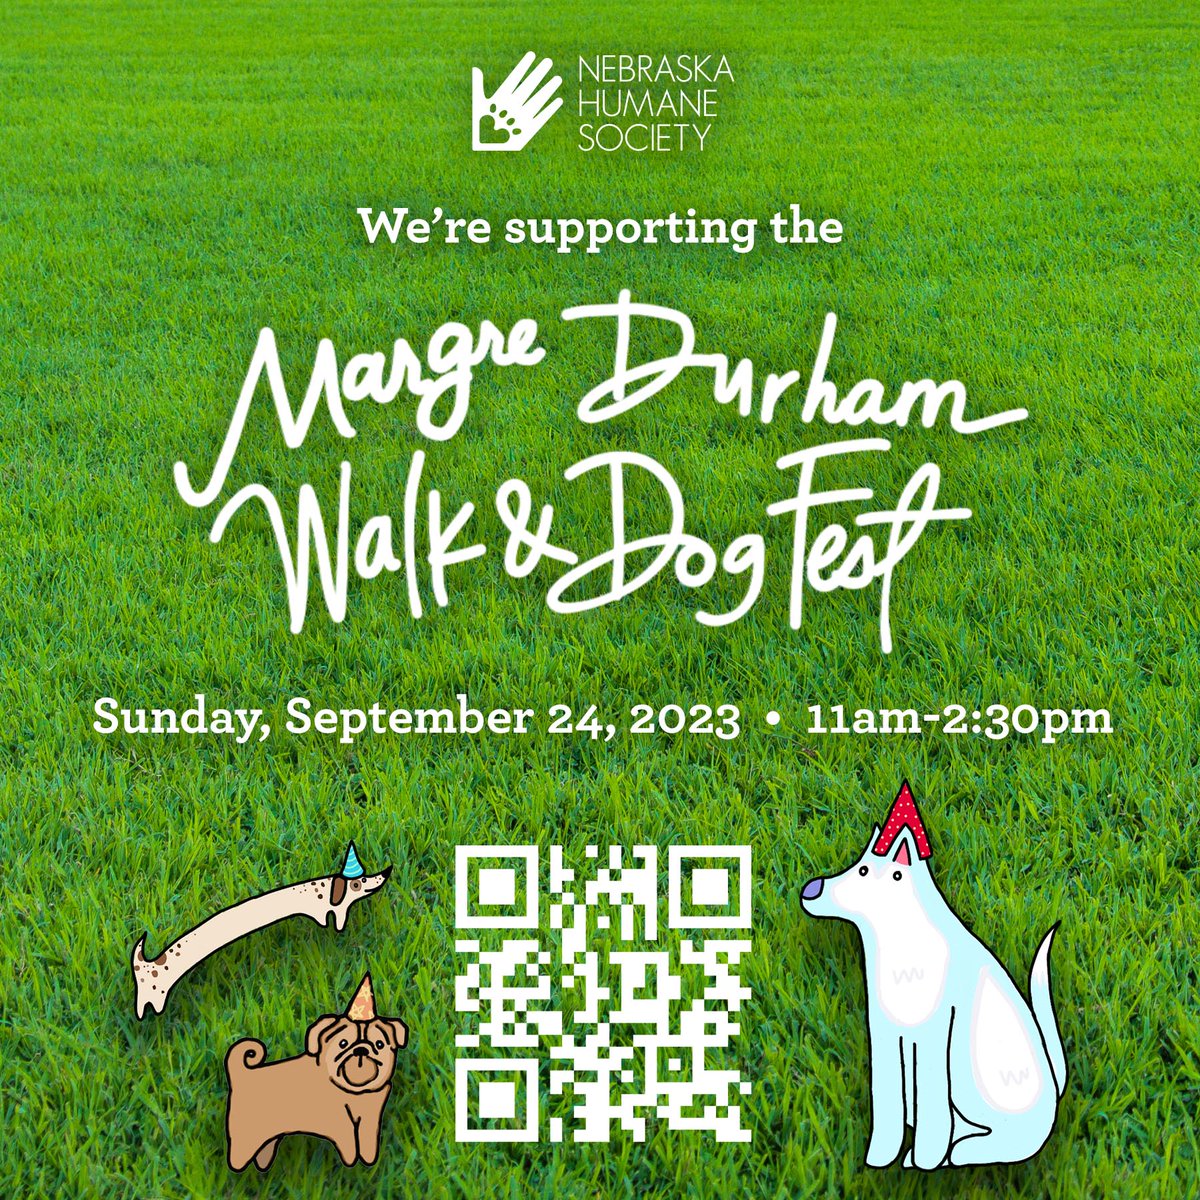 We are excited to attend the @NEHumaneSociety's #MargreDurhamWalkAndDogFest this weekend!! If you want to come out & see us, use the QR code for more details and to get your tickets. See everyone out there!🐕🚶#UrgentPetCareOmaha #CharityEvent #OmahaEvents #OmahaNebraska #NHS